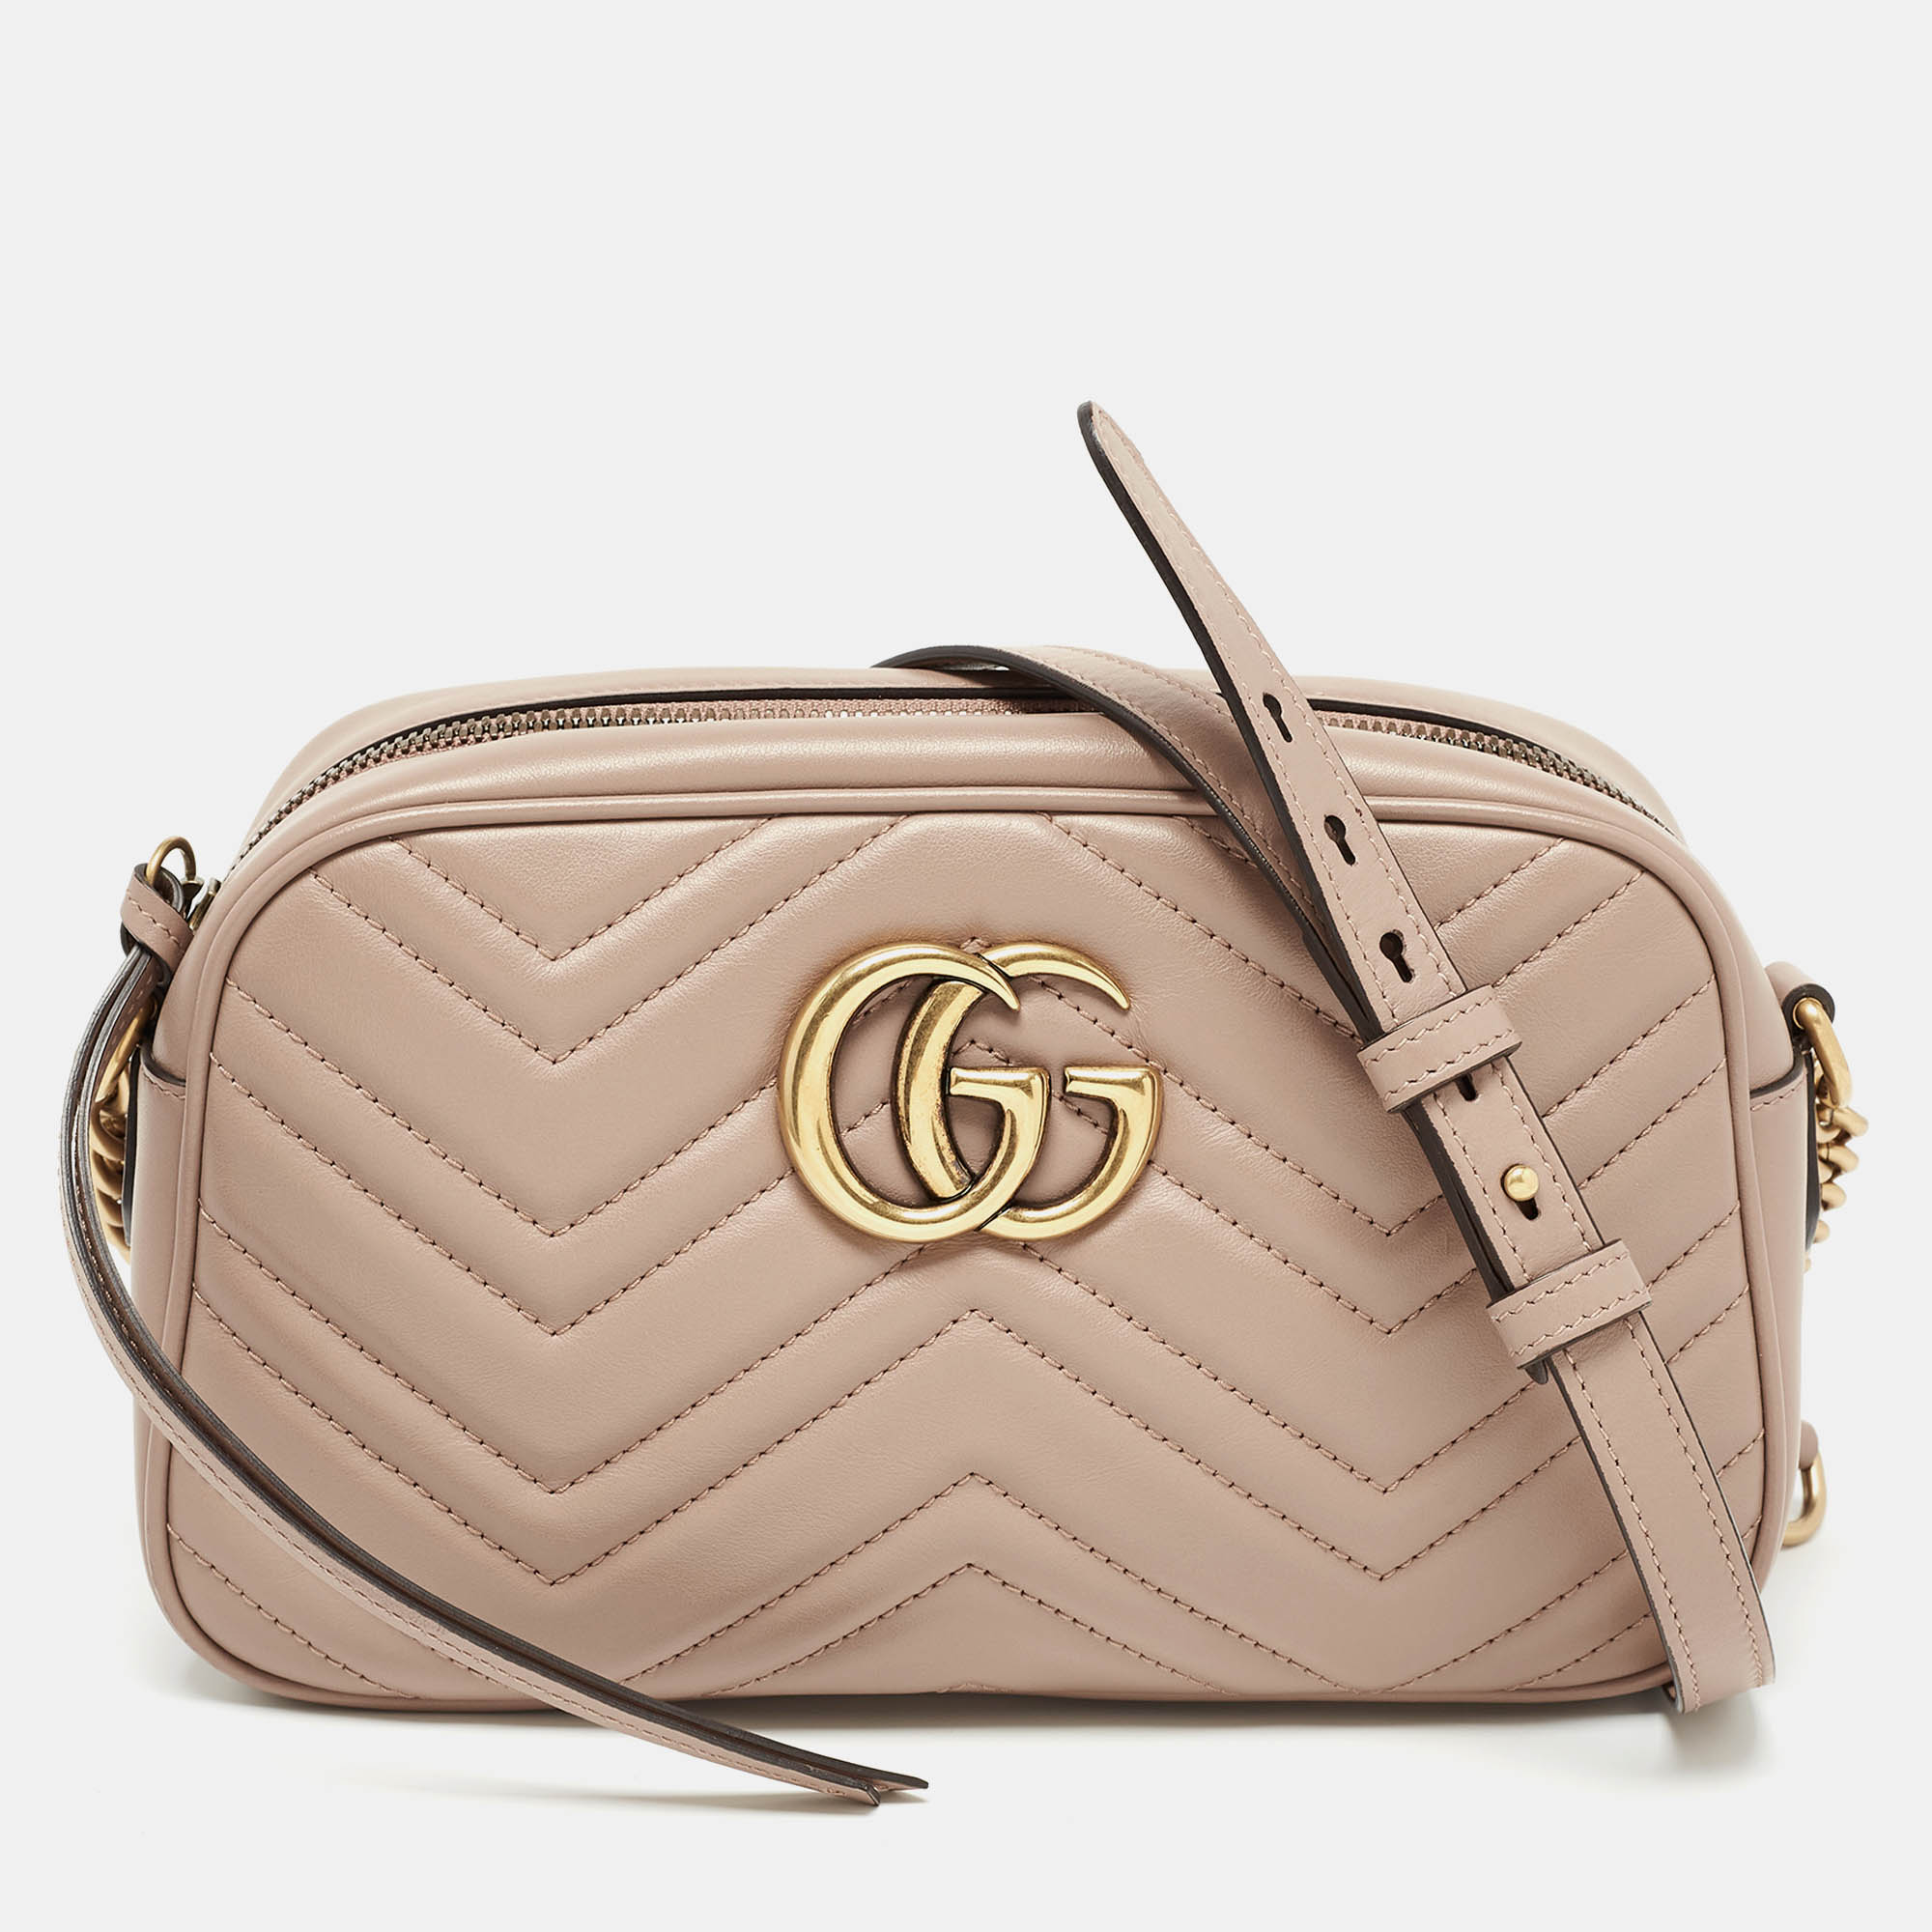 Indulge in luxury with this Gucci GG Marmont bag. Meticulously crafted from premium materials it combines exquisite design impeccable craftsmanship and timeless elegance. Elevate your style with this fashion accessory.